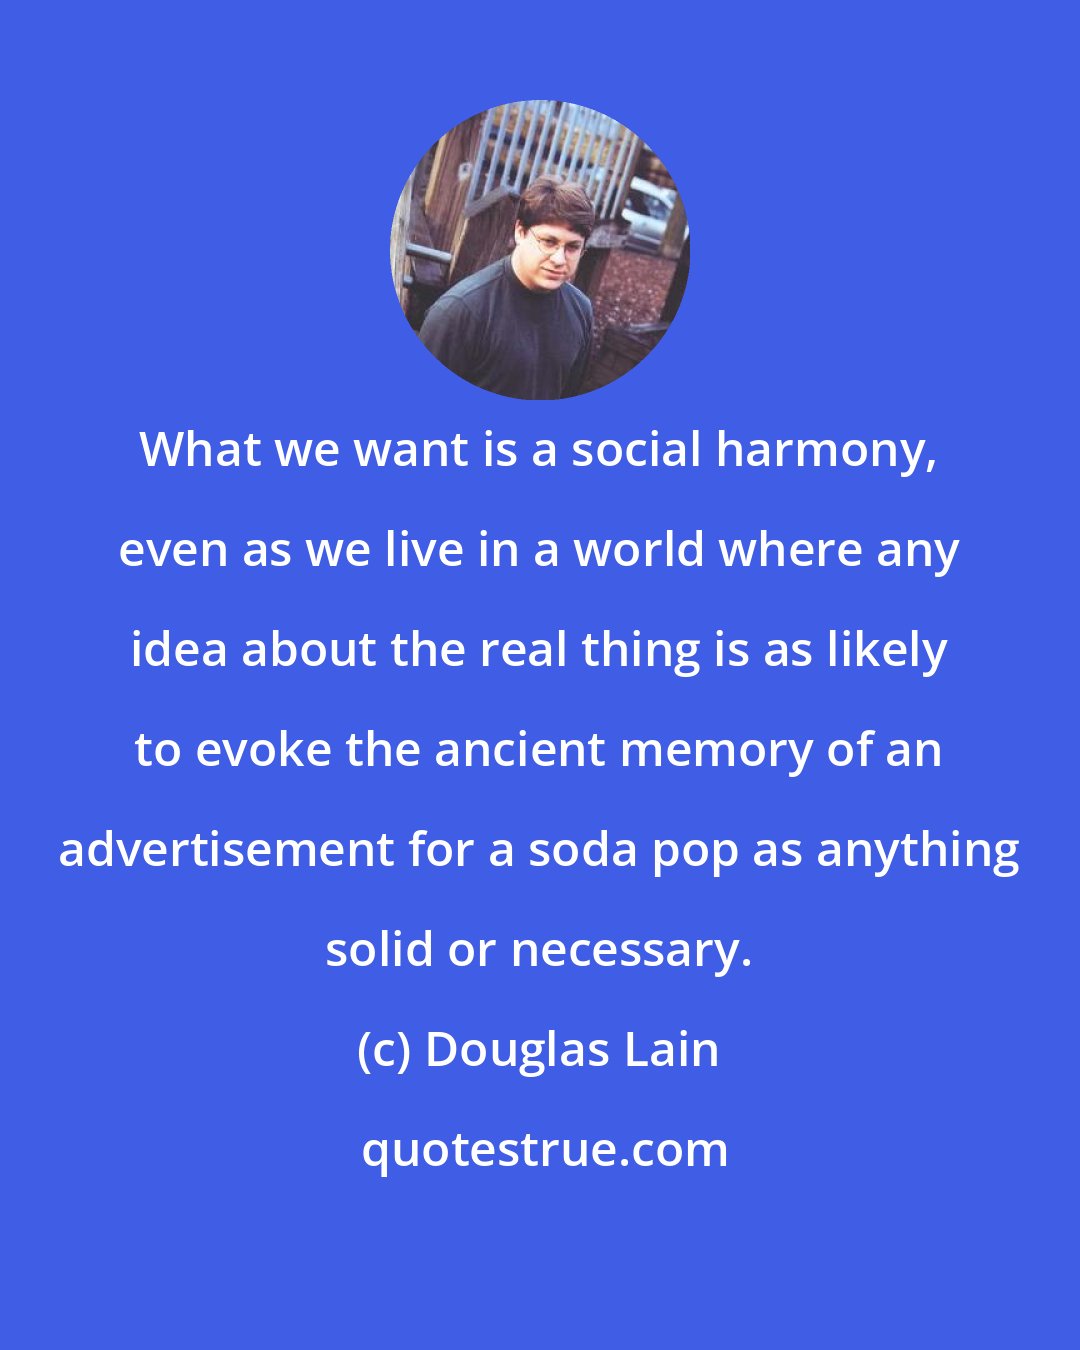 Douglas Lain: What we want is a social harmony, even as we live in a world where any idea about the real thing is as likely to evoke the ancient memory of an advertisement for a soda pop as anything solid or necessary.